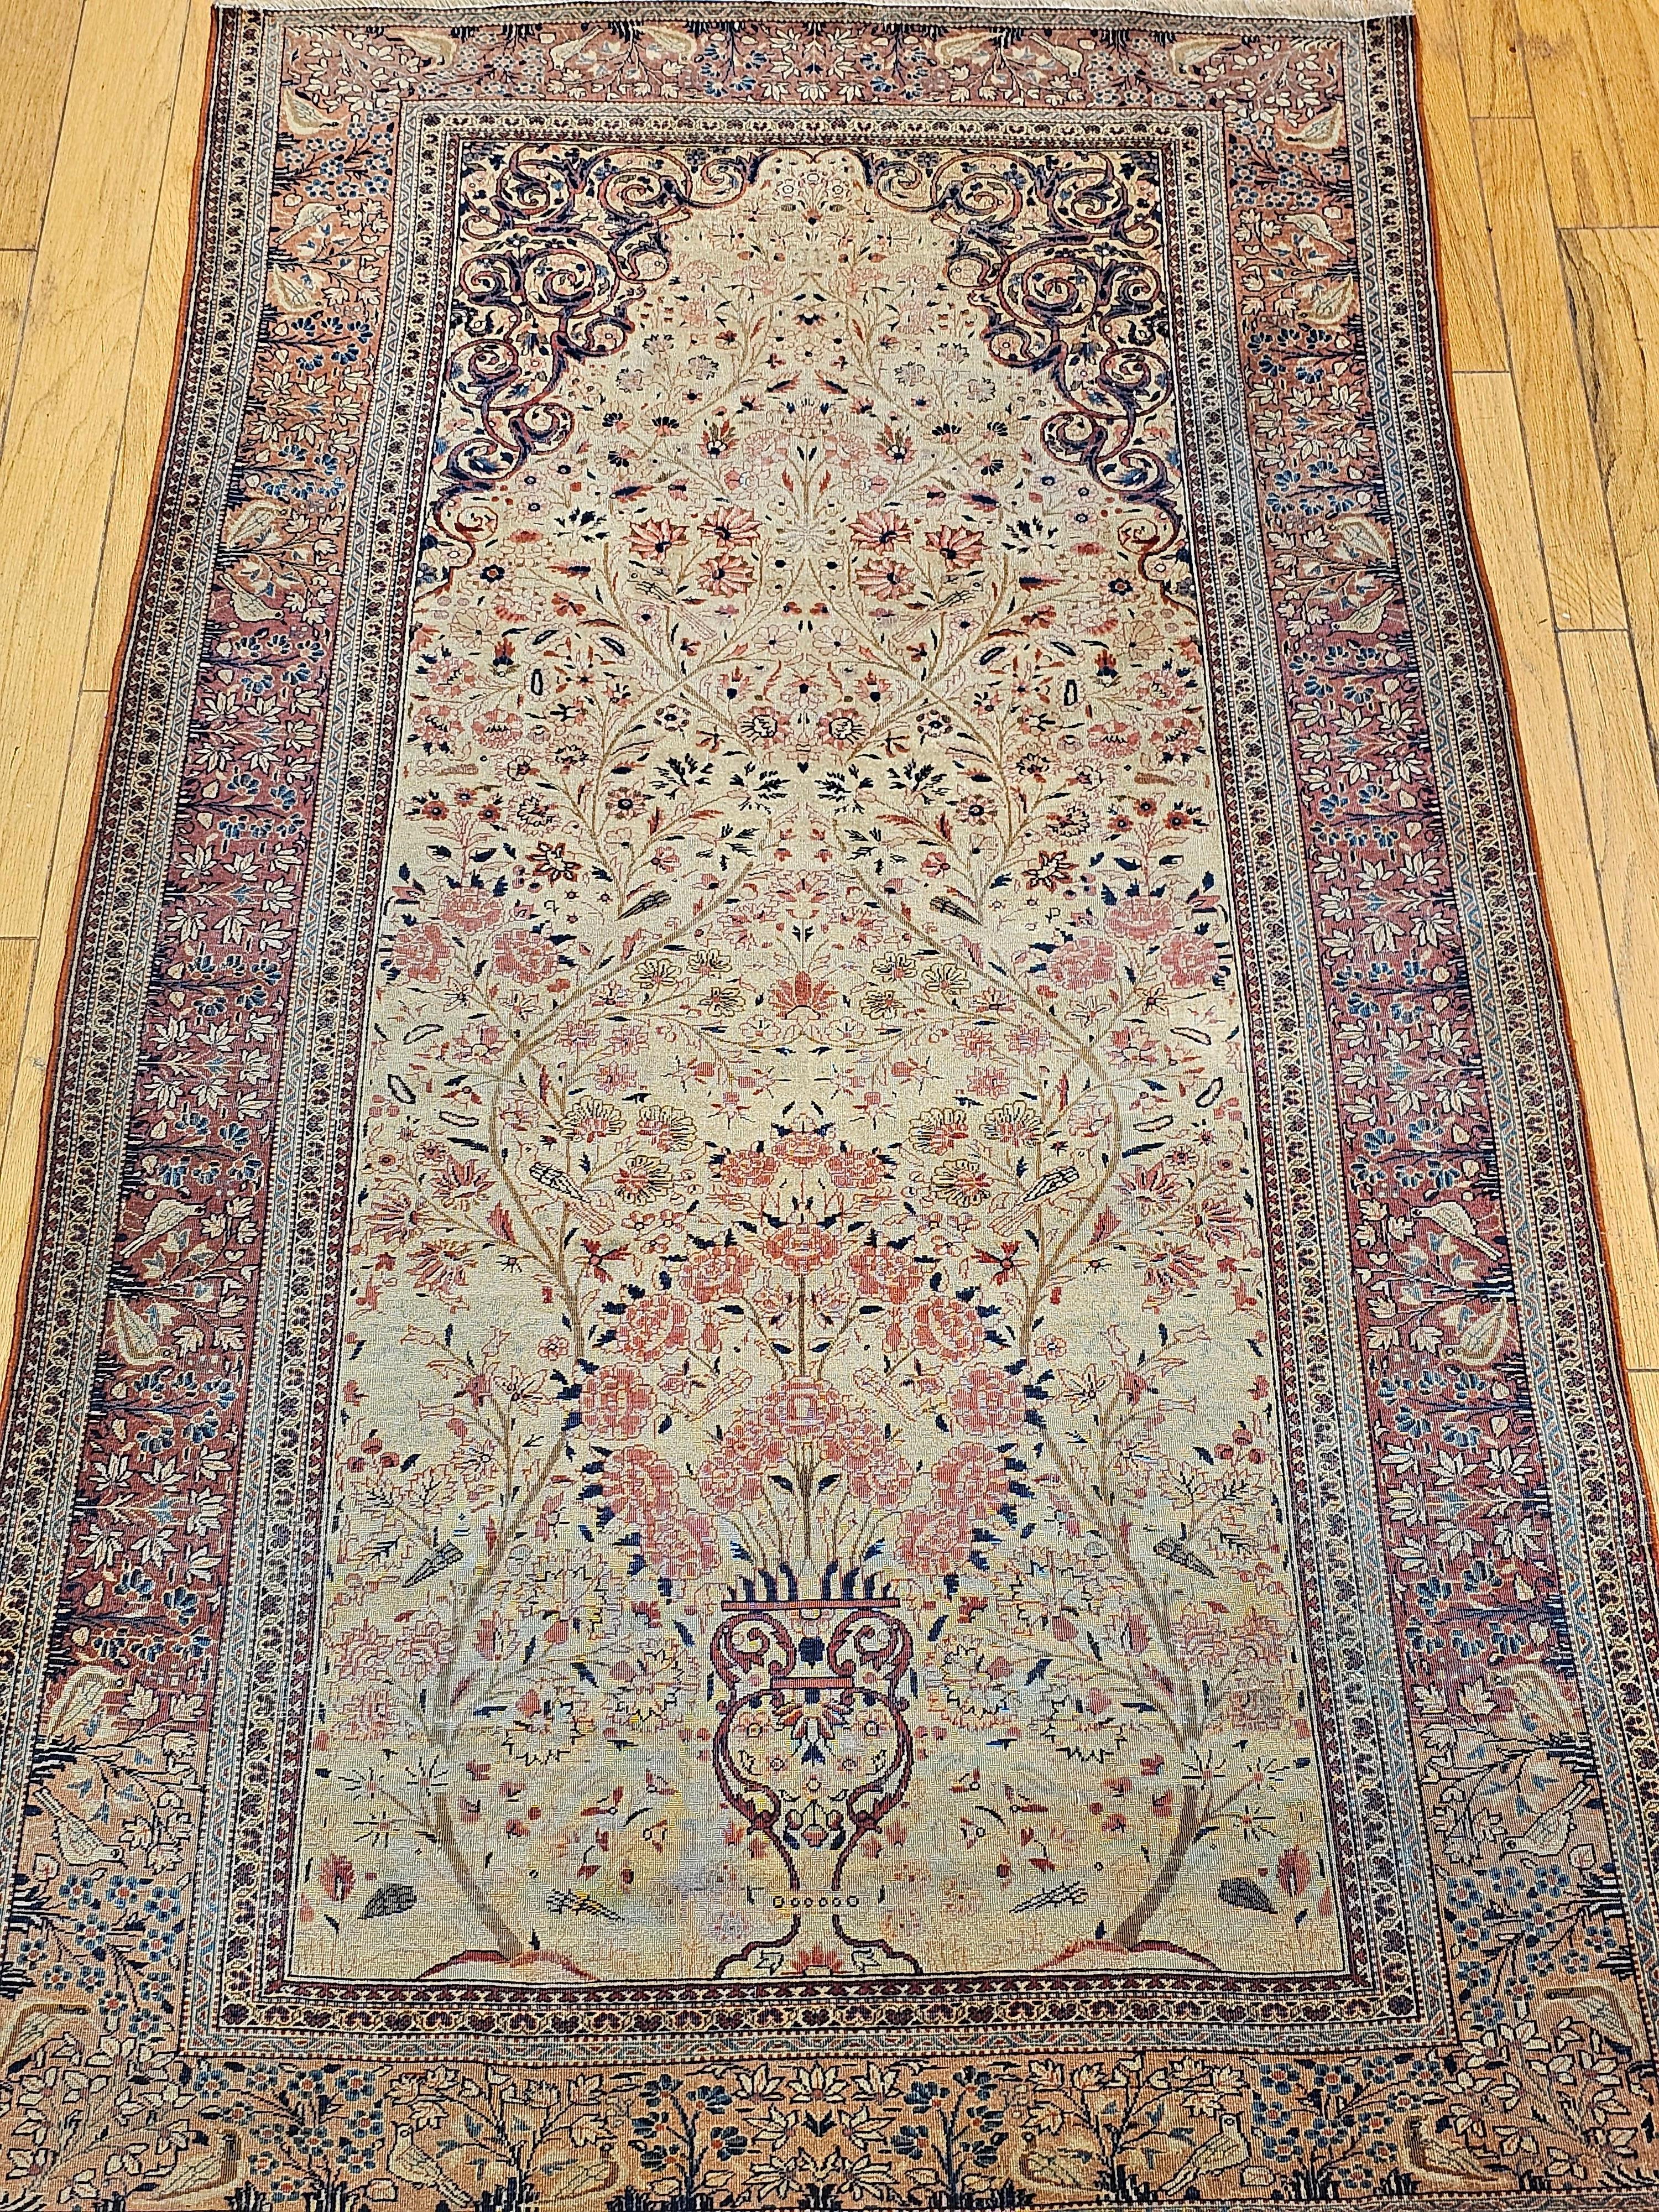 19th Century Persian Kashan Vase “Tree of Life” Rug in Ivory, Brick Red, Navy For Sale 5